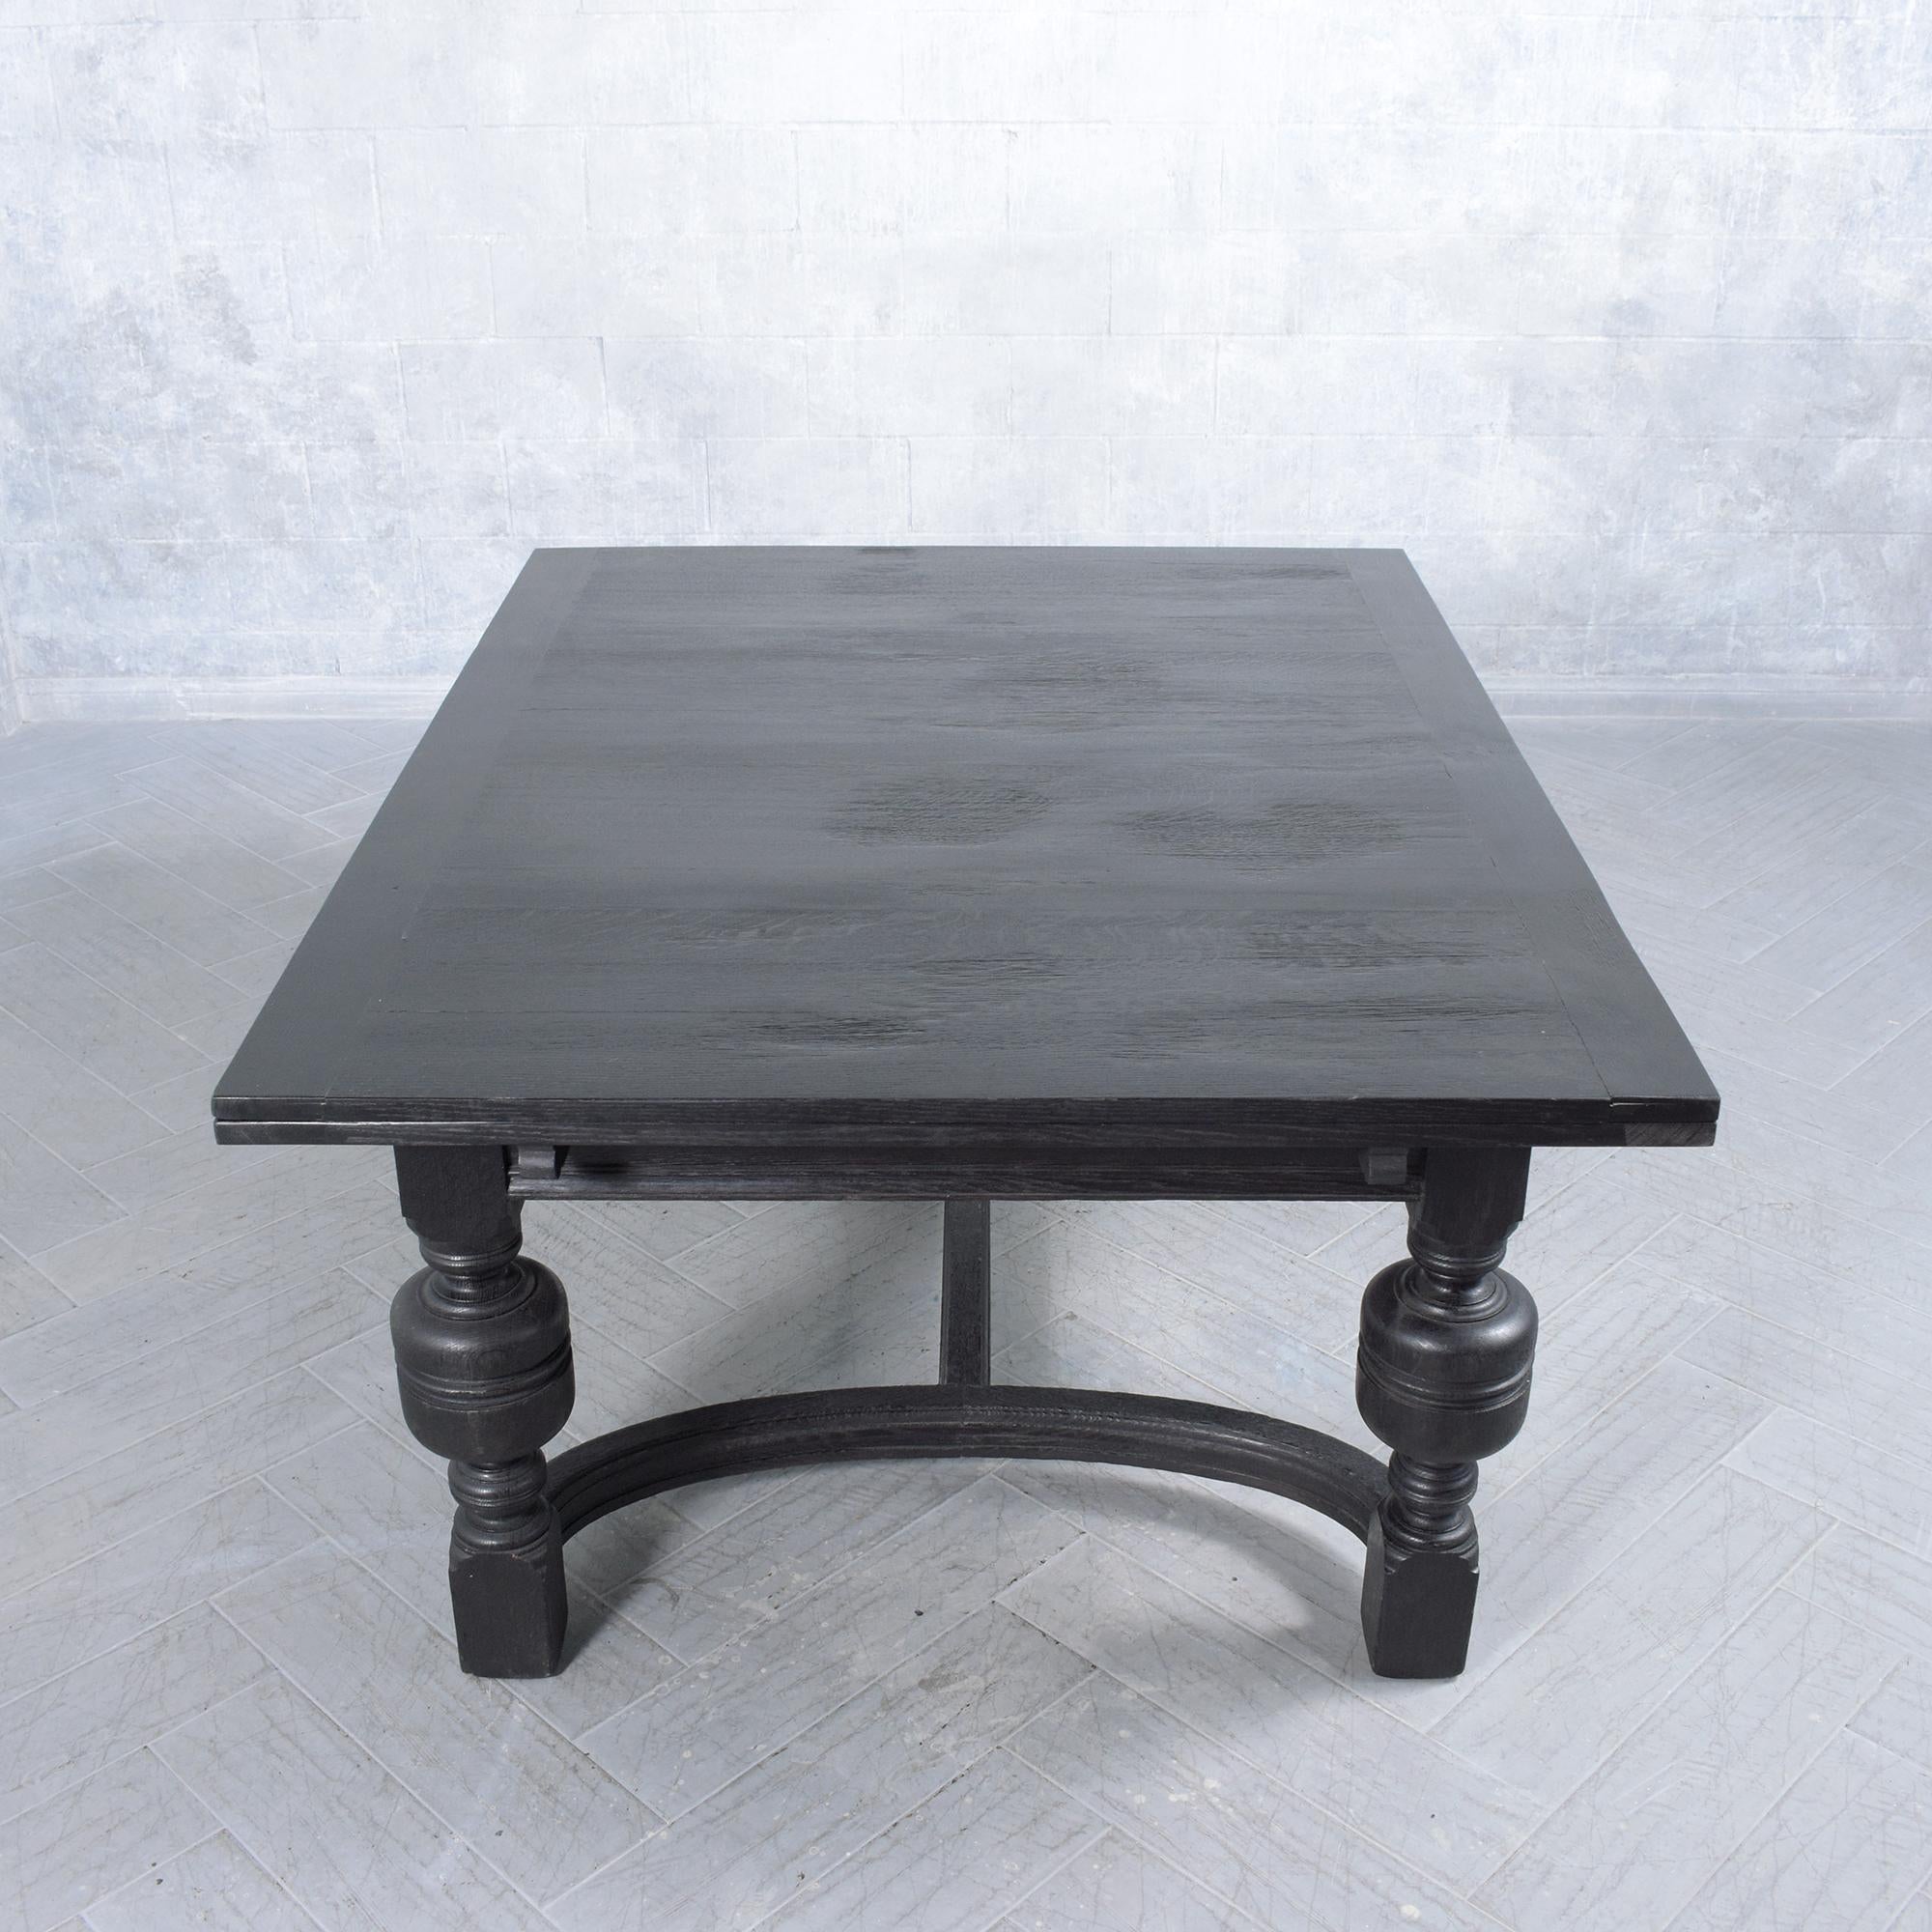 1850s Spanish Extendable Dining Table: Ebonized Solid Wood with French Design In Good Condition For Sale In Los Angeles, CA